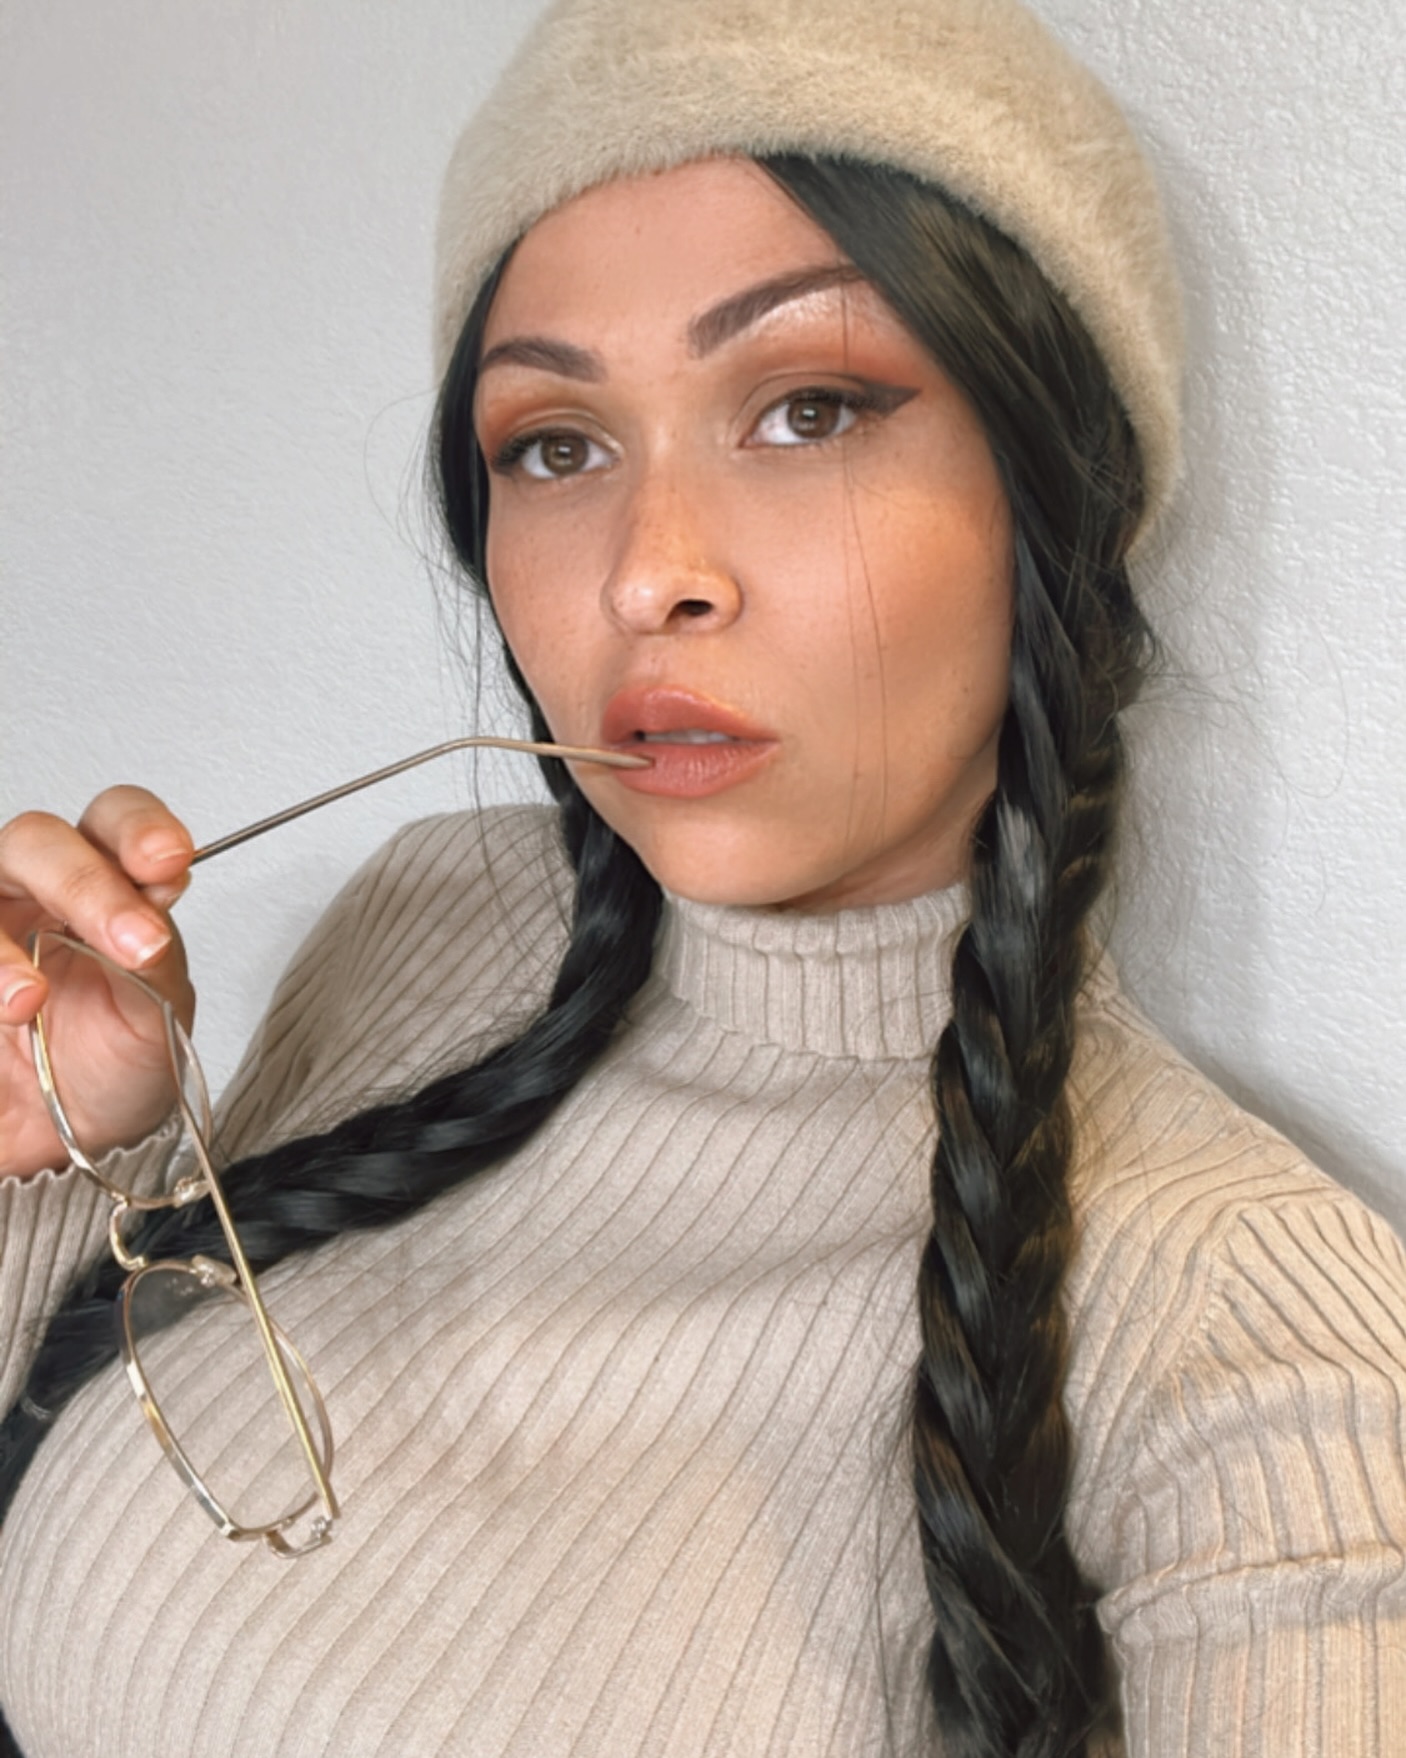 How was the peck of peppers Peter Piper picked already pickled?

#mixed #shapeshifter #browneyesgirl #browneyesmakeup #mixedgirls #girlswithglasses #pigtails #herringbone